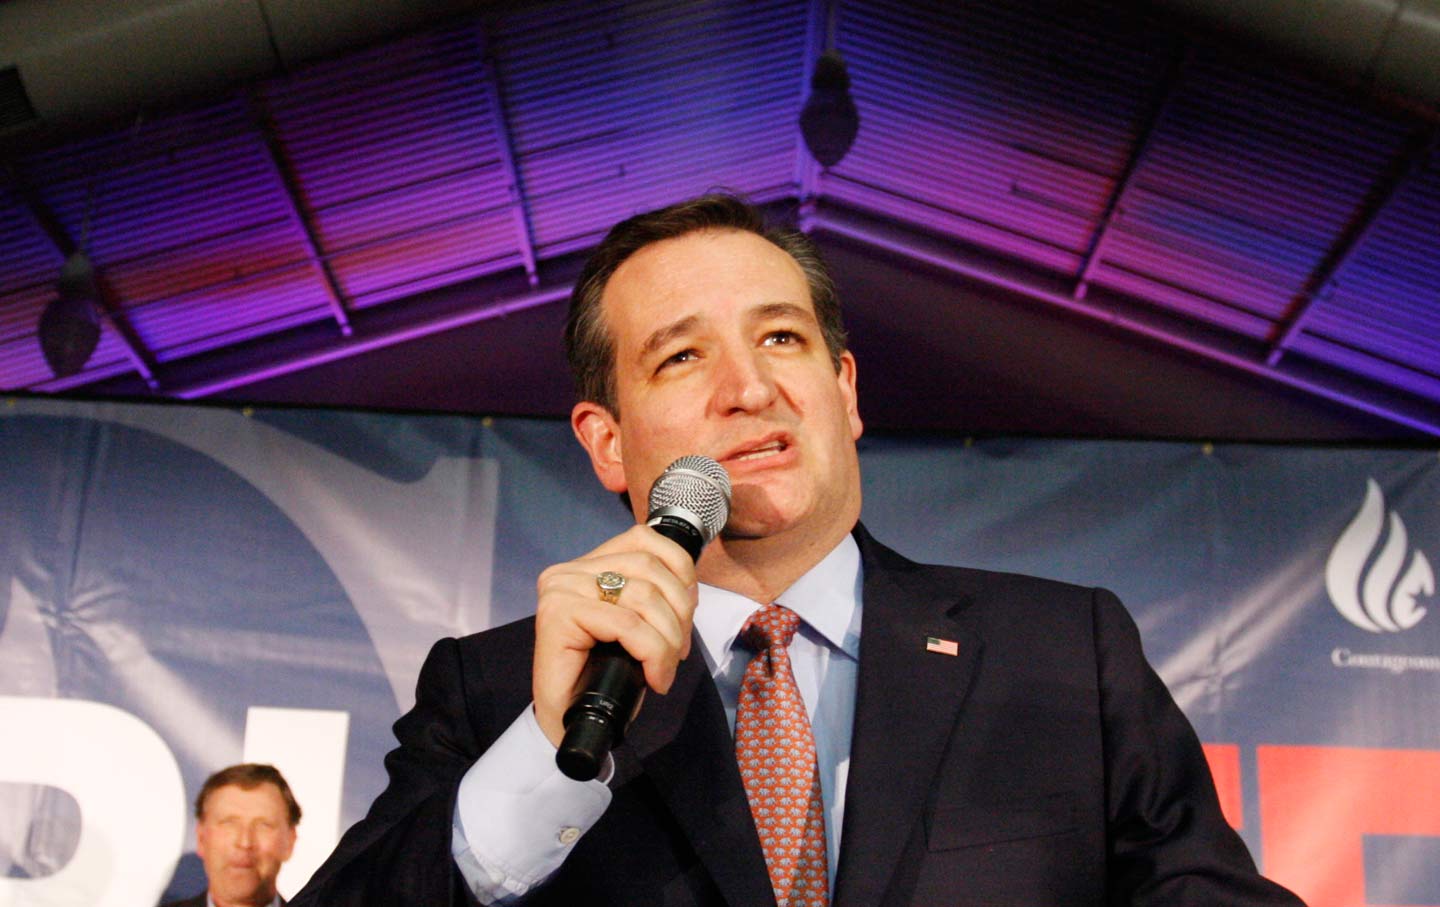 Ted Cruz Backers Should Be Ashamed of Themselves and Their ‘Wacko Bird’ Candidate